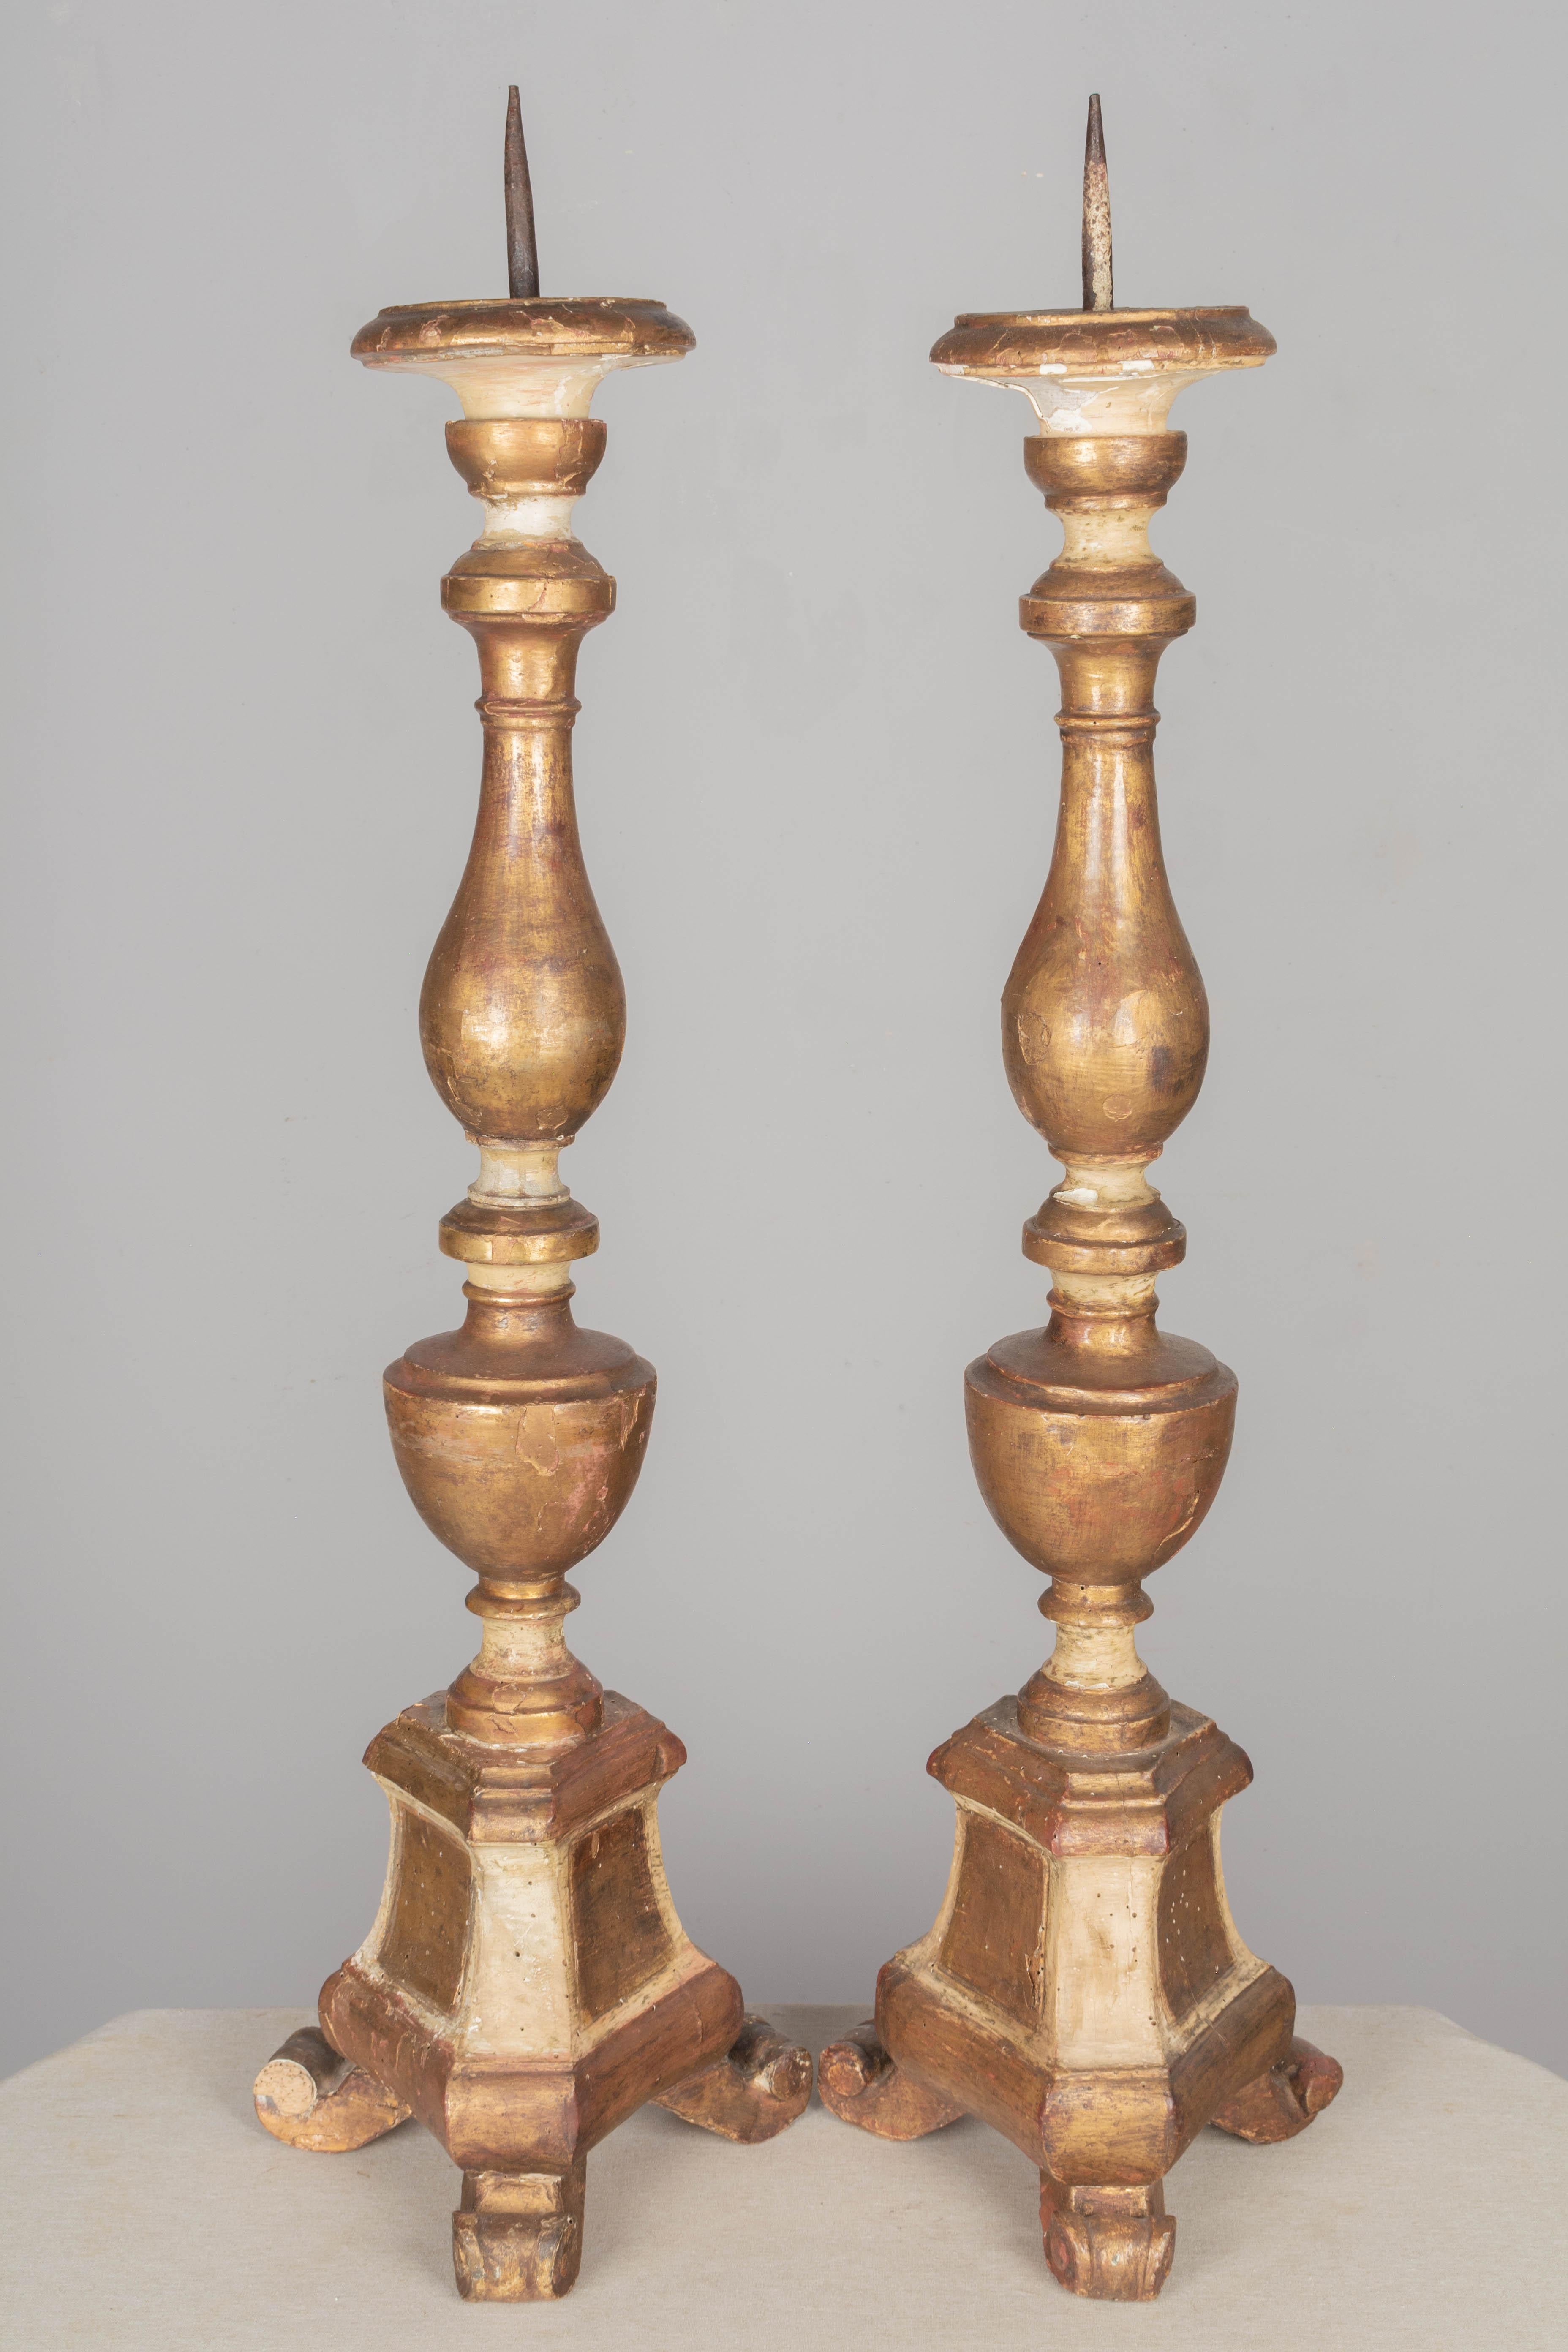 Hand-Crafted 18th Century Giltwood Italian Candlesticks Pair For Sale